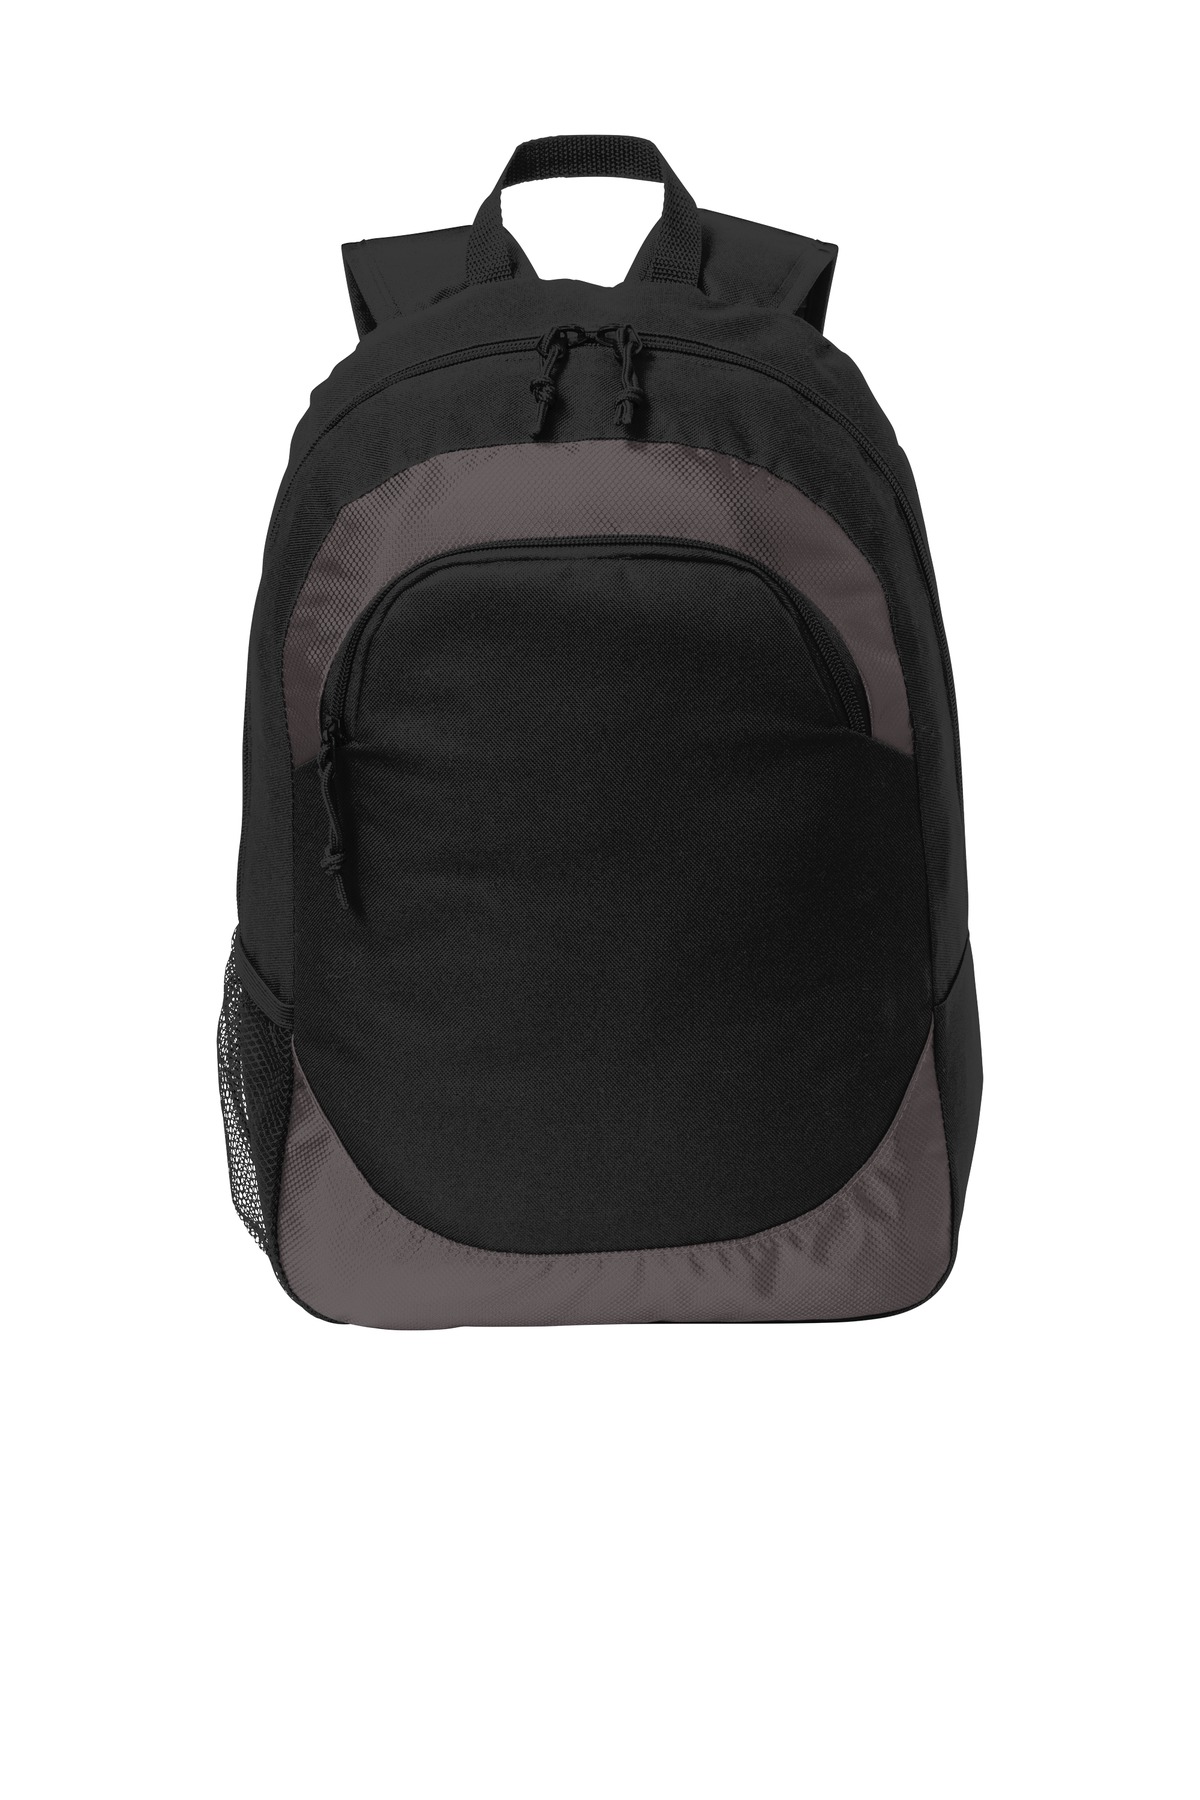 Port Authority BG217 Circuit Backpack - Sterling Gray / Black - OSFA